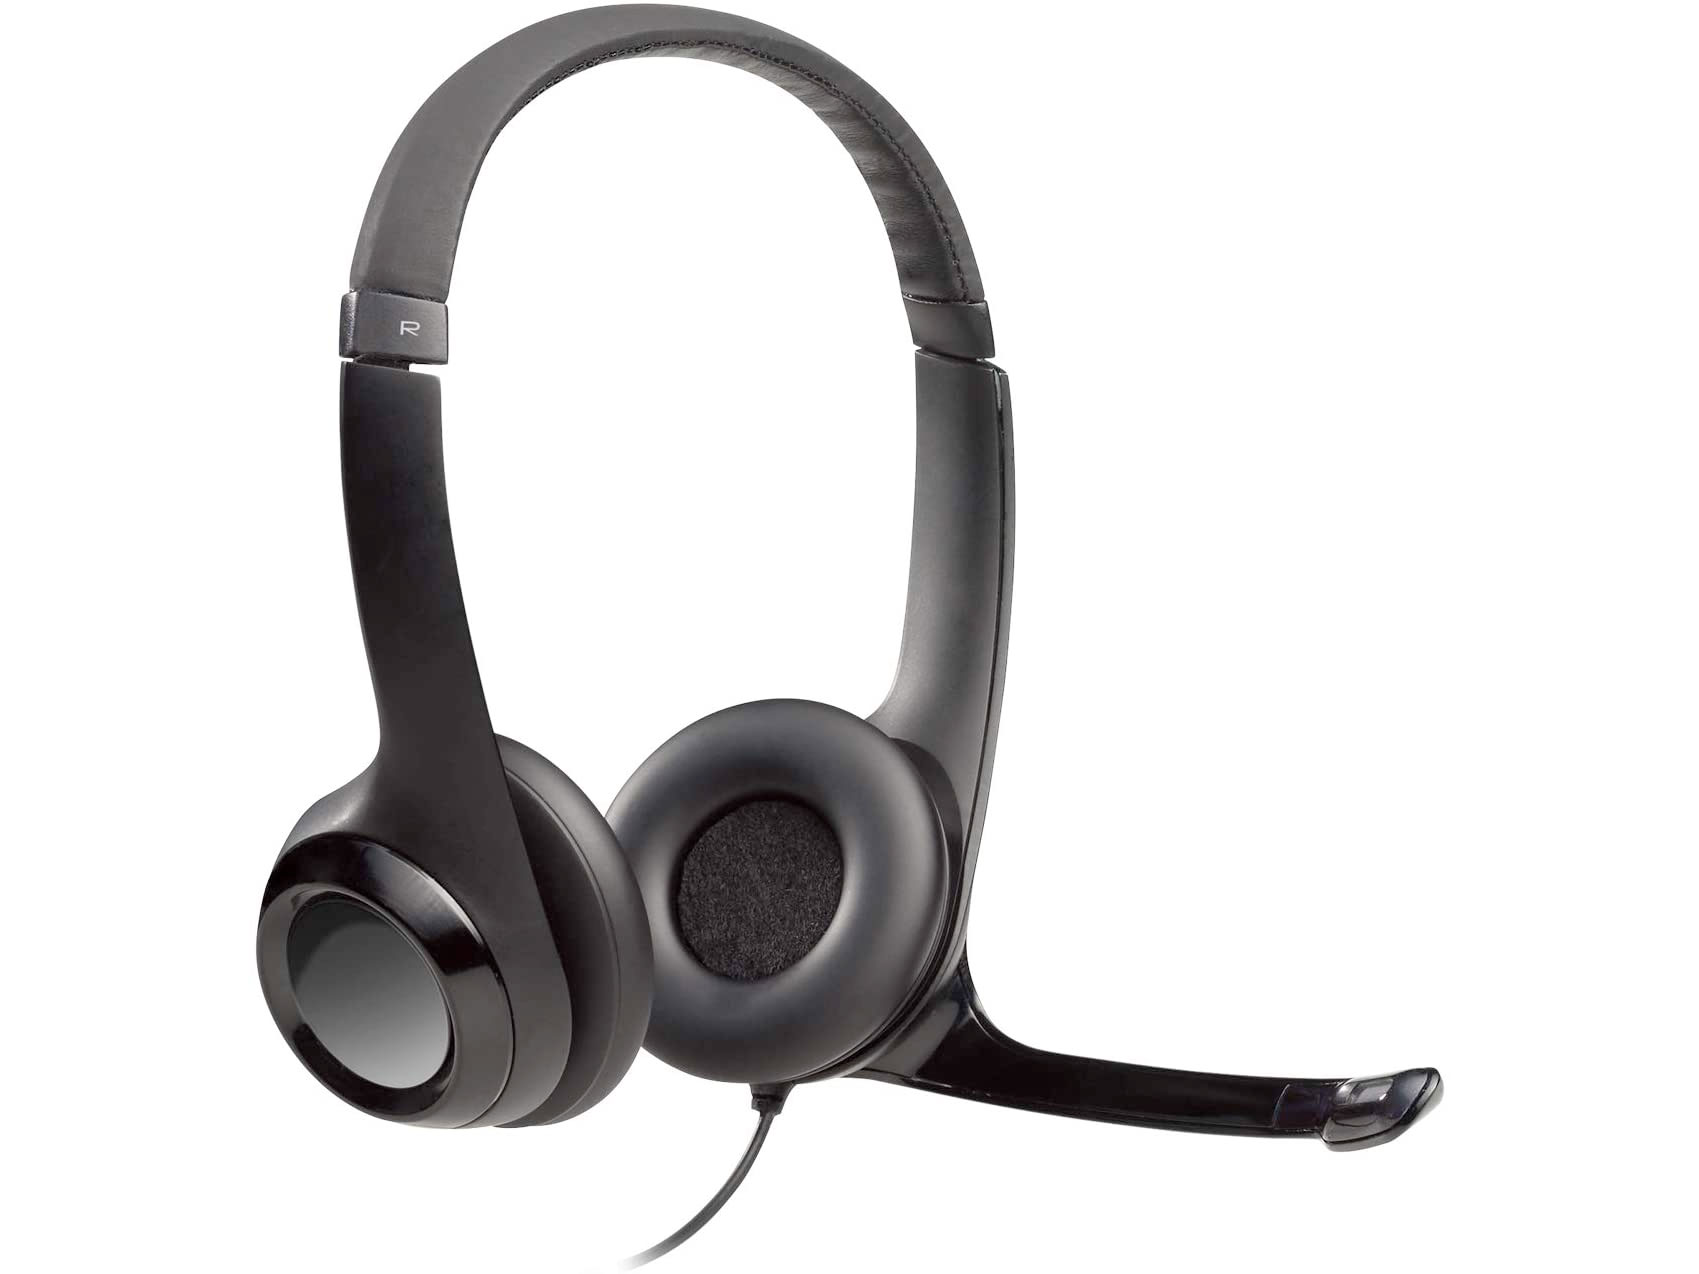 Amazon：Logitech USB Headset H390 with Noise Cancelling Mic只賣$24.99